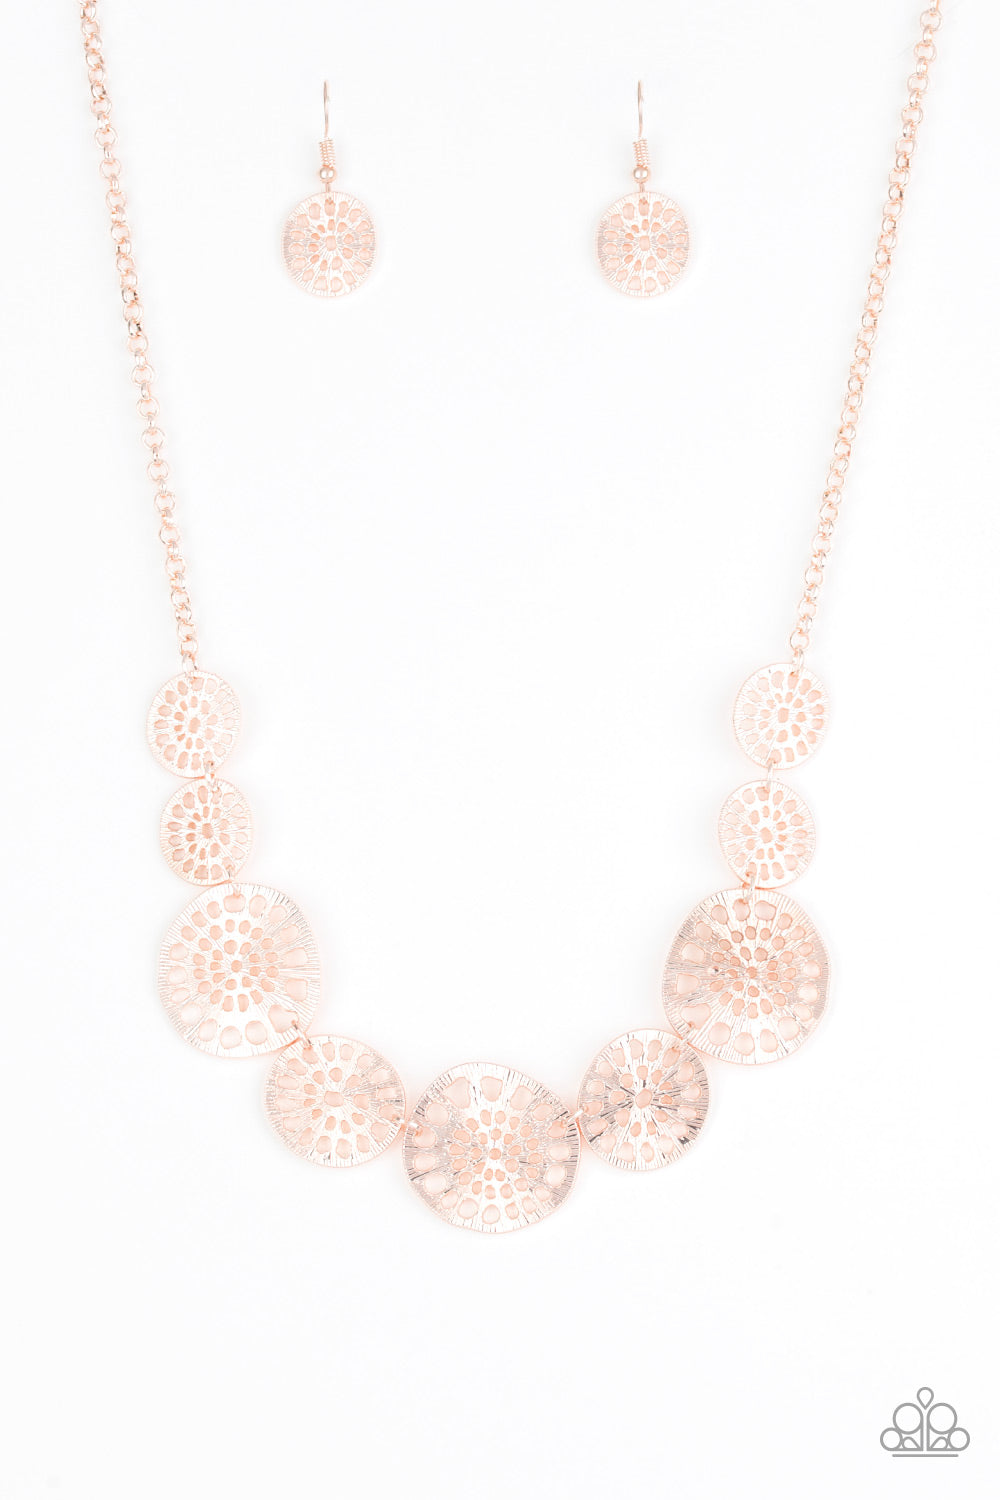 Your Own Free WHEEL - rose gold - Paparazzi necklace